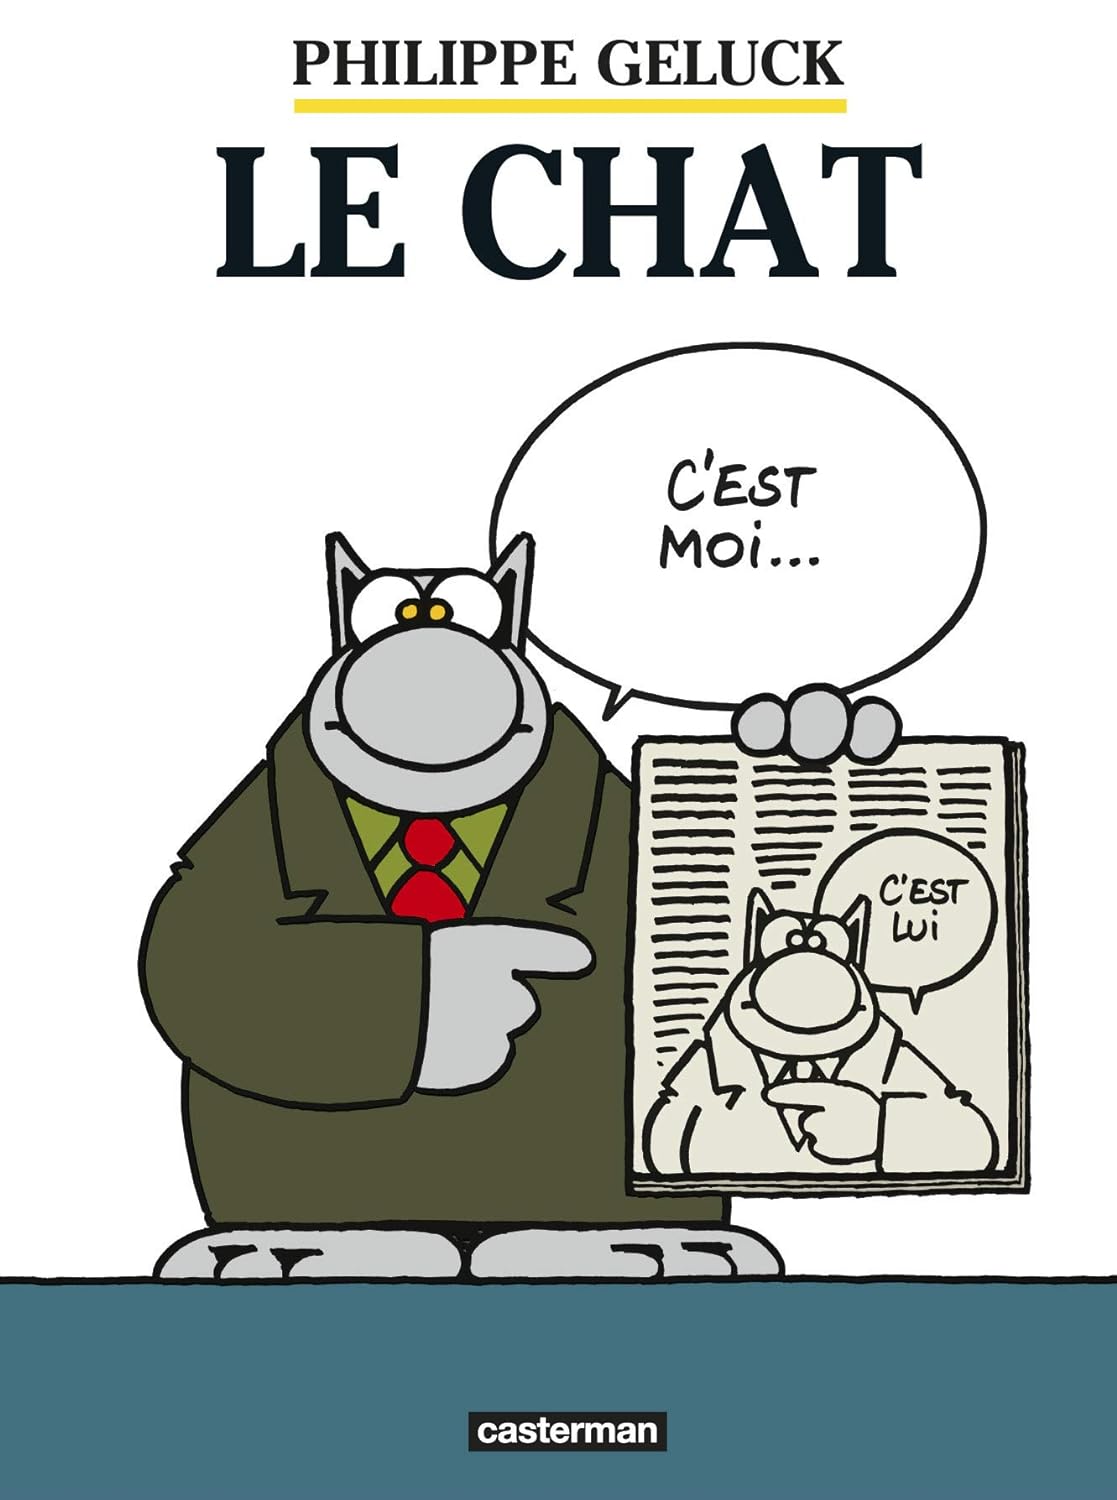 Philippe Geluck: Le Chat (French language, 2002)